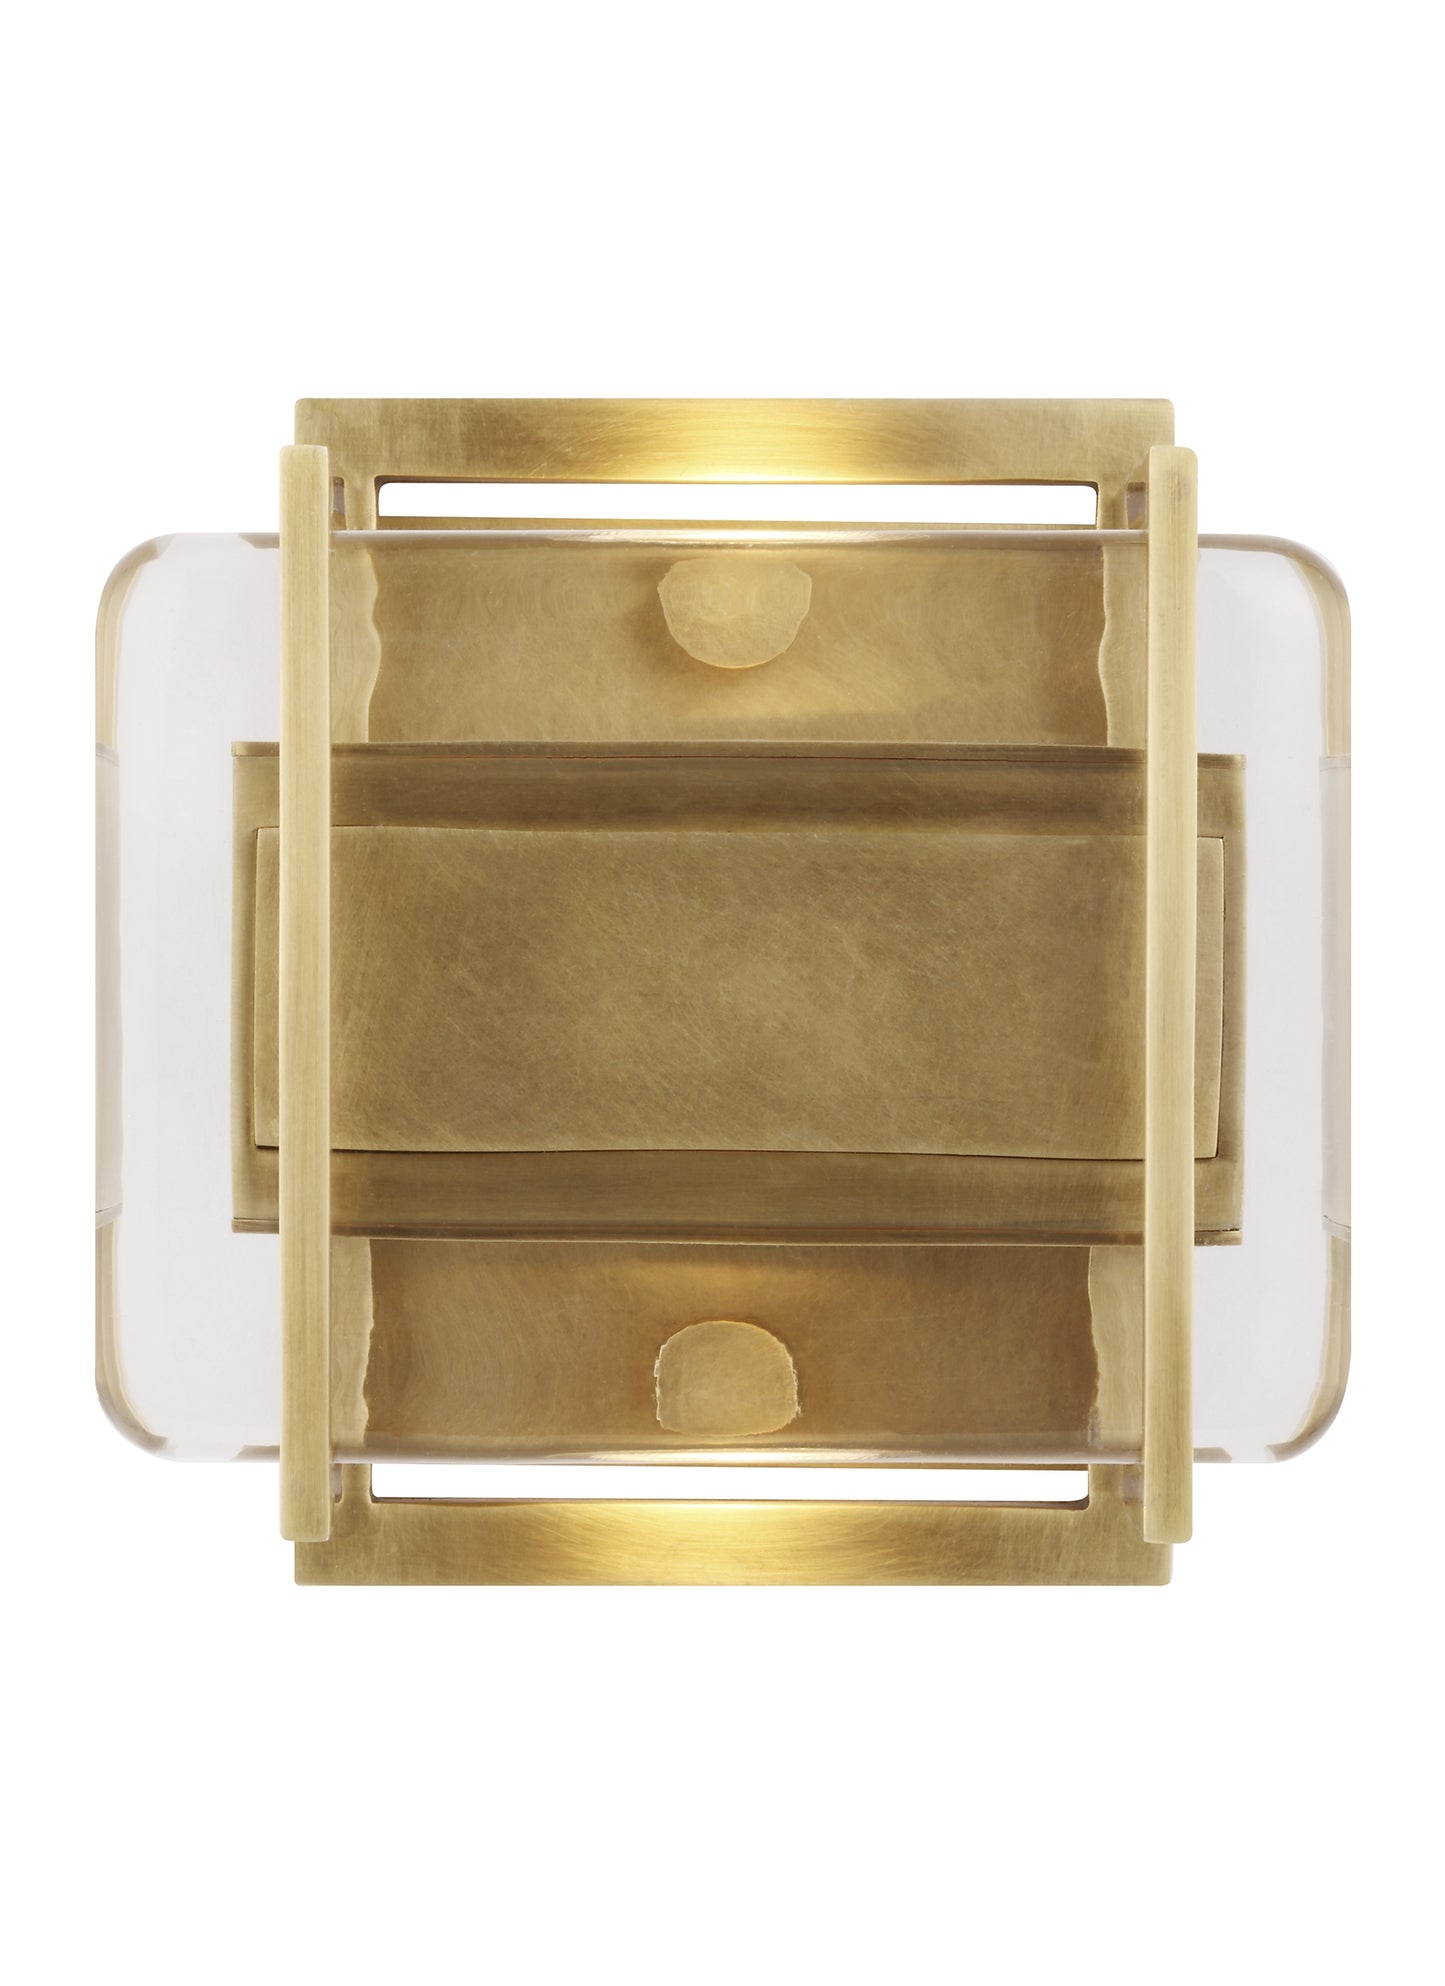 Chic Wall Sconce - Retail Building Wall Lights